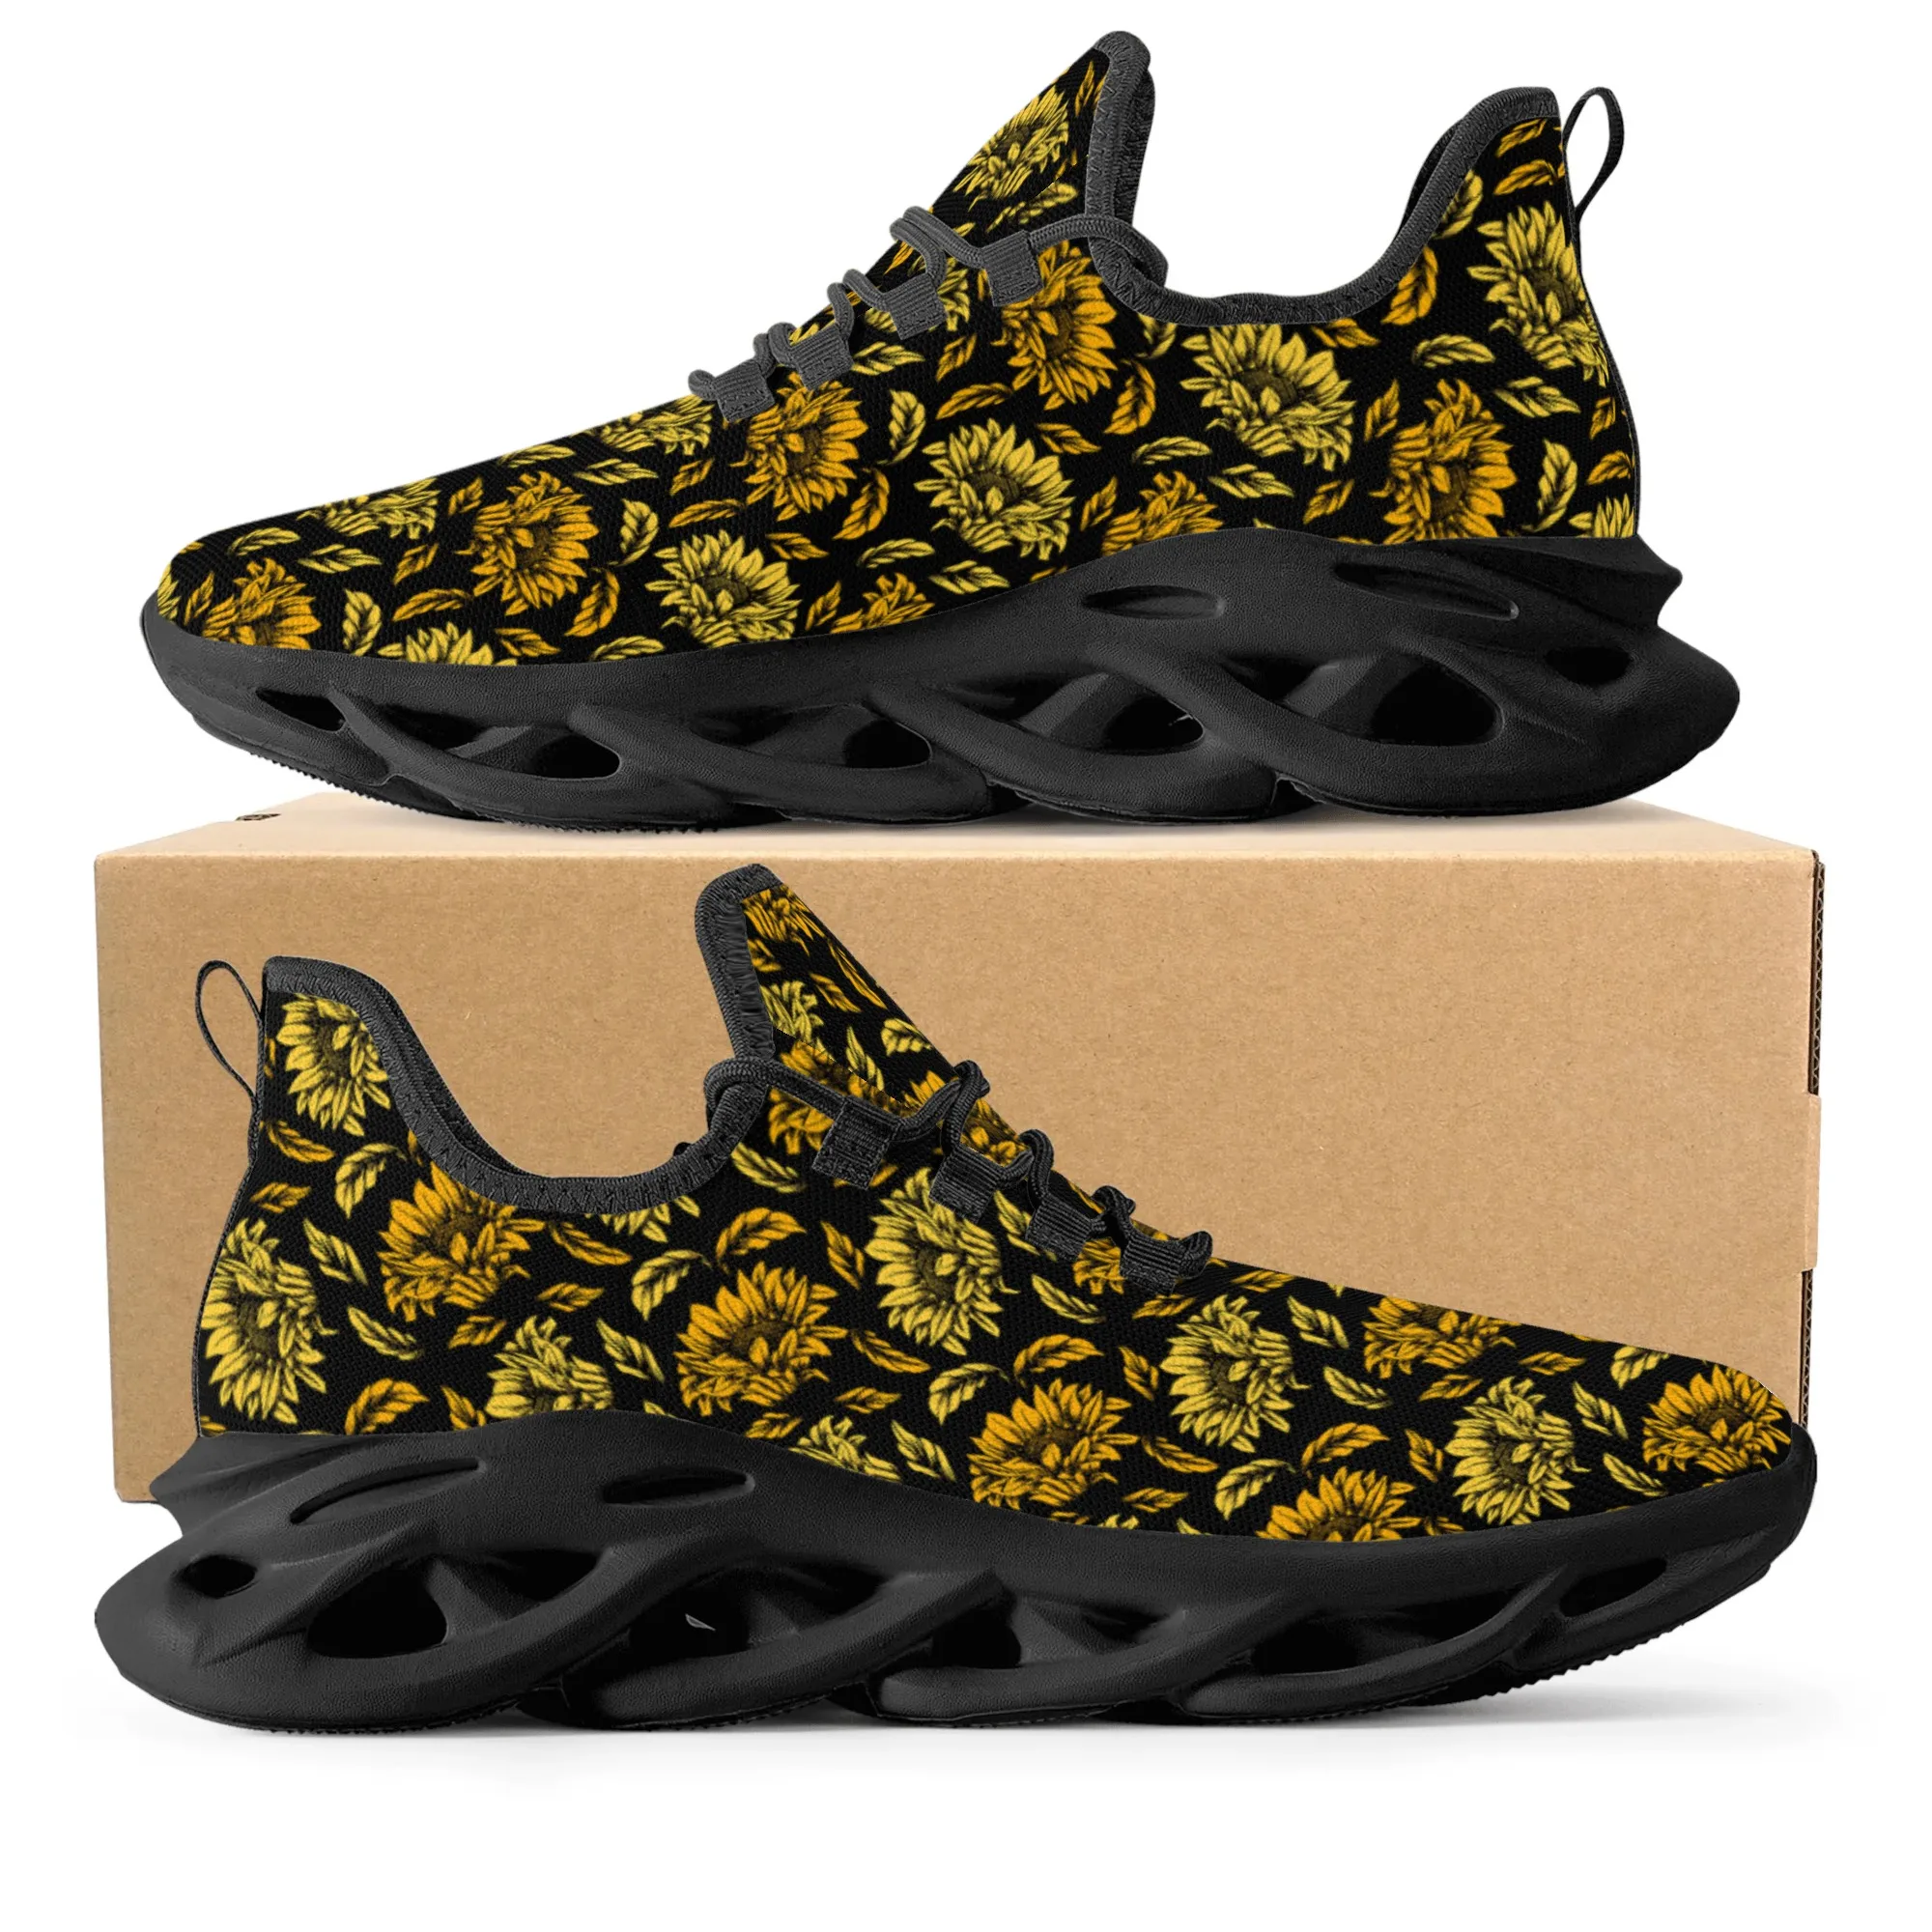 Sunflowers Print Design Fashion Funny Sneakers Men Women Teenager Breathable Mesh Casual Running Shoes Lace-Up Basketball Shoe airavata women s lace up sneakers fashion running athletic shoes casual lightweight breathable soft sport outdoor mesh comfort